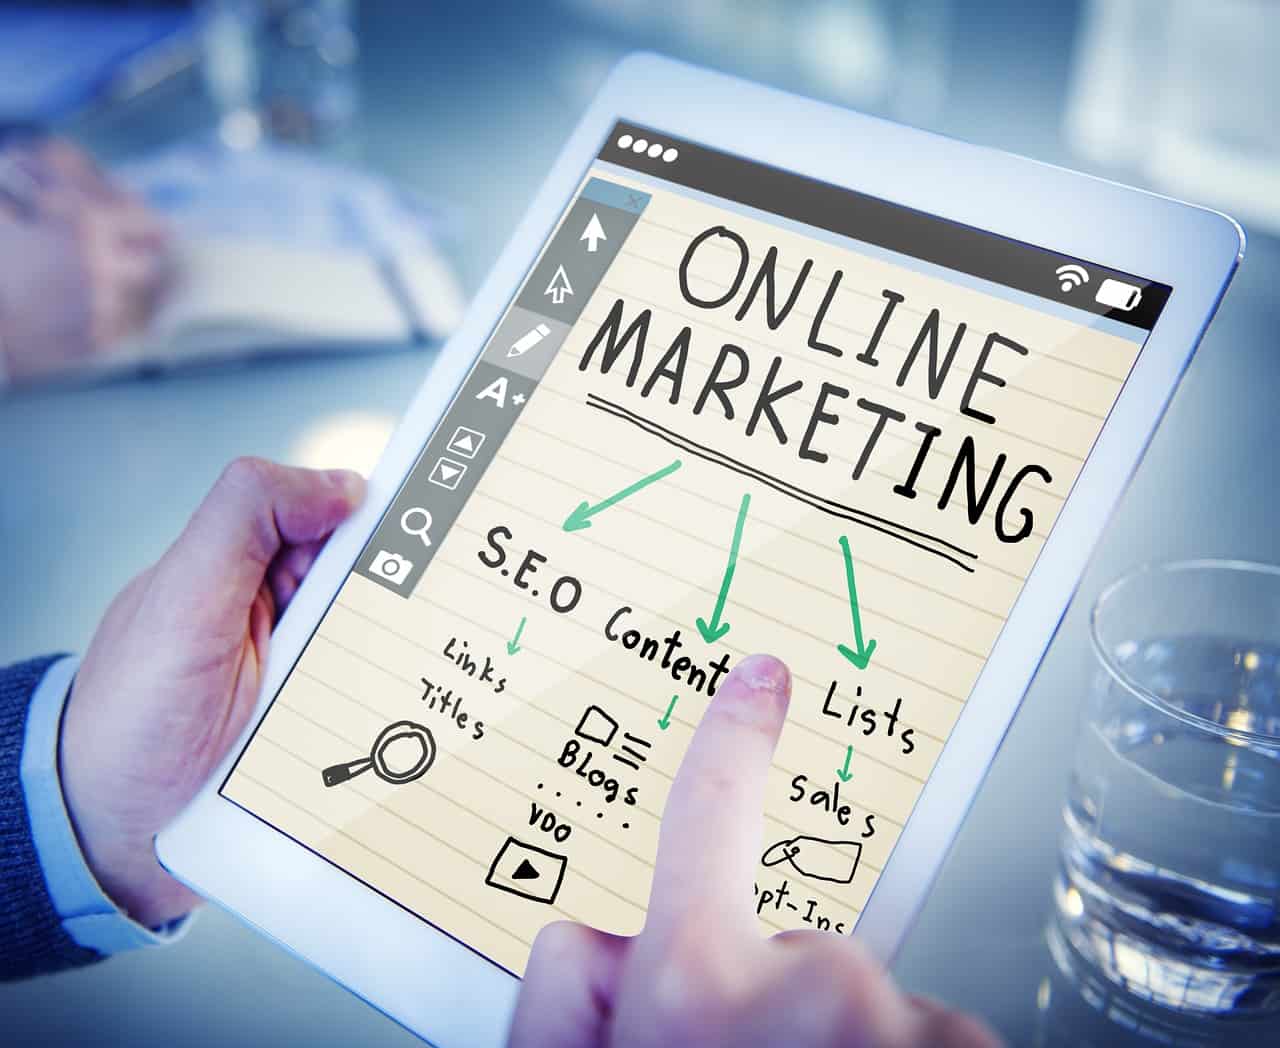 Get ready to dominate in 2023 with these 5 digital marketing hacks